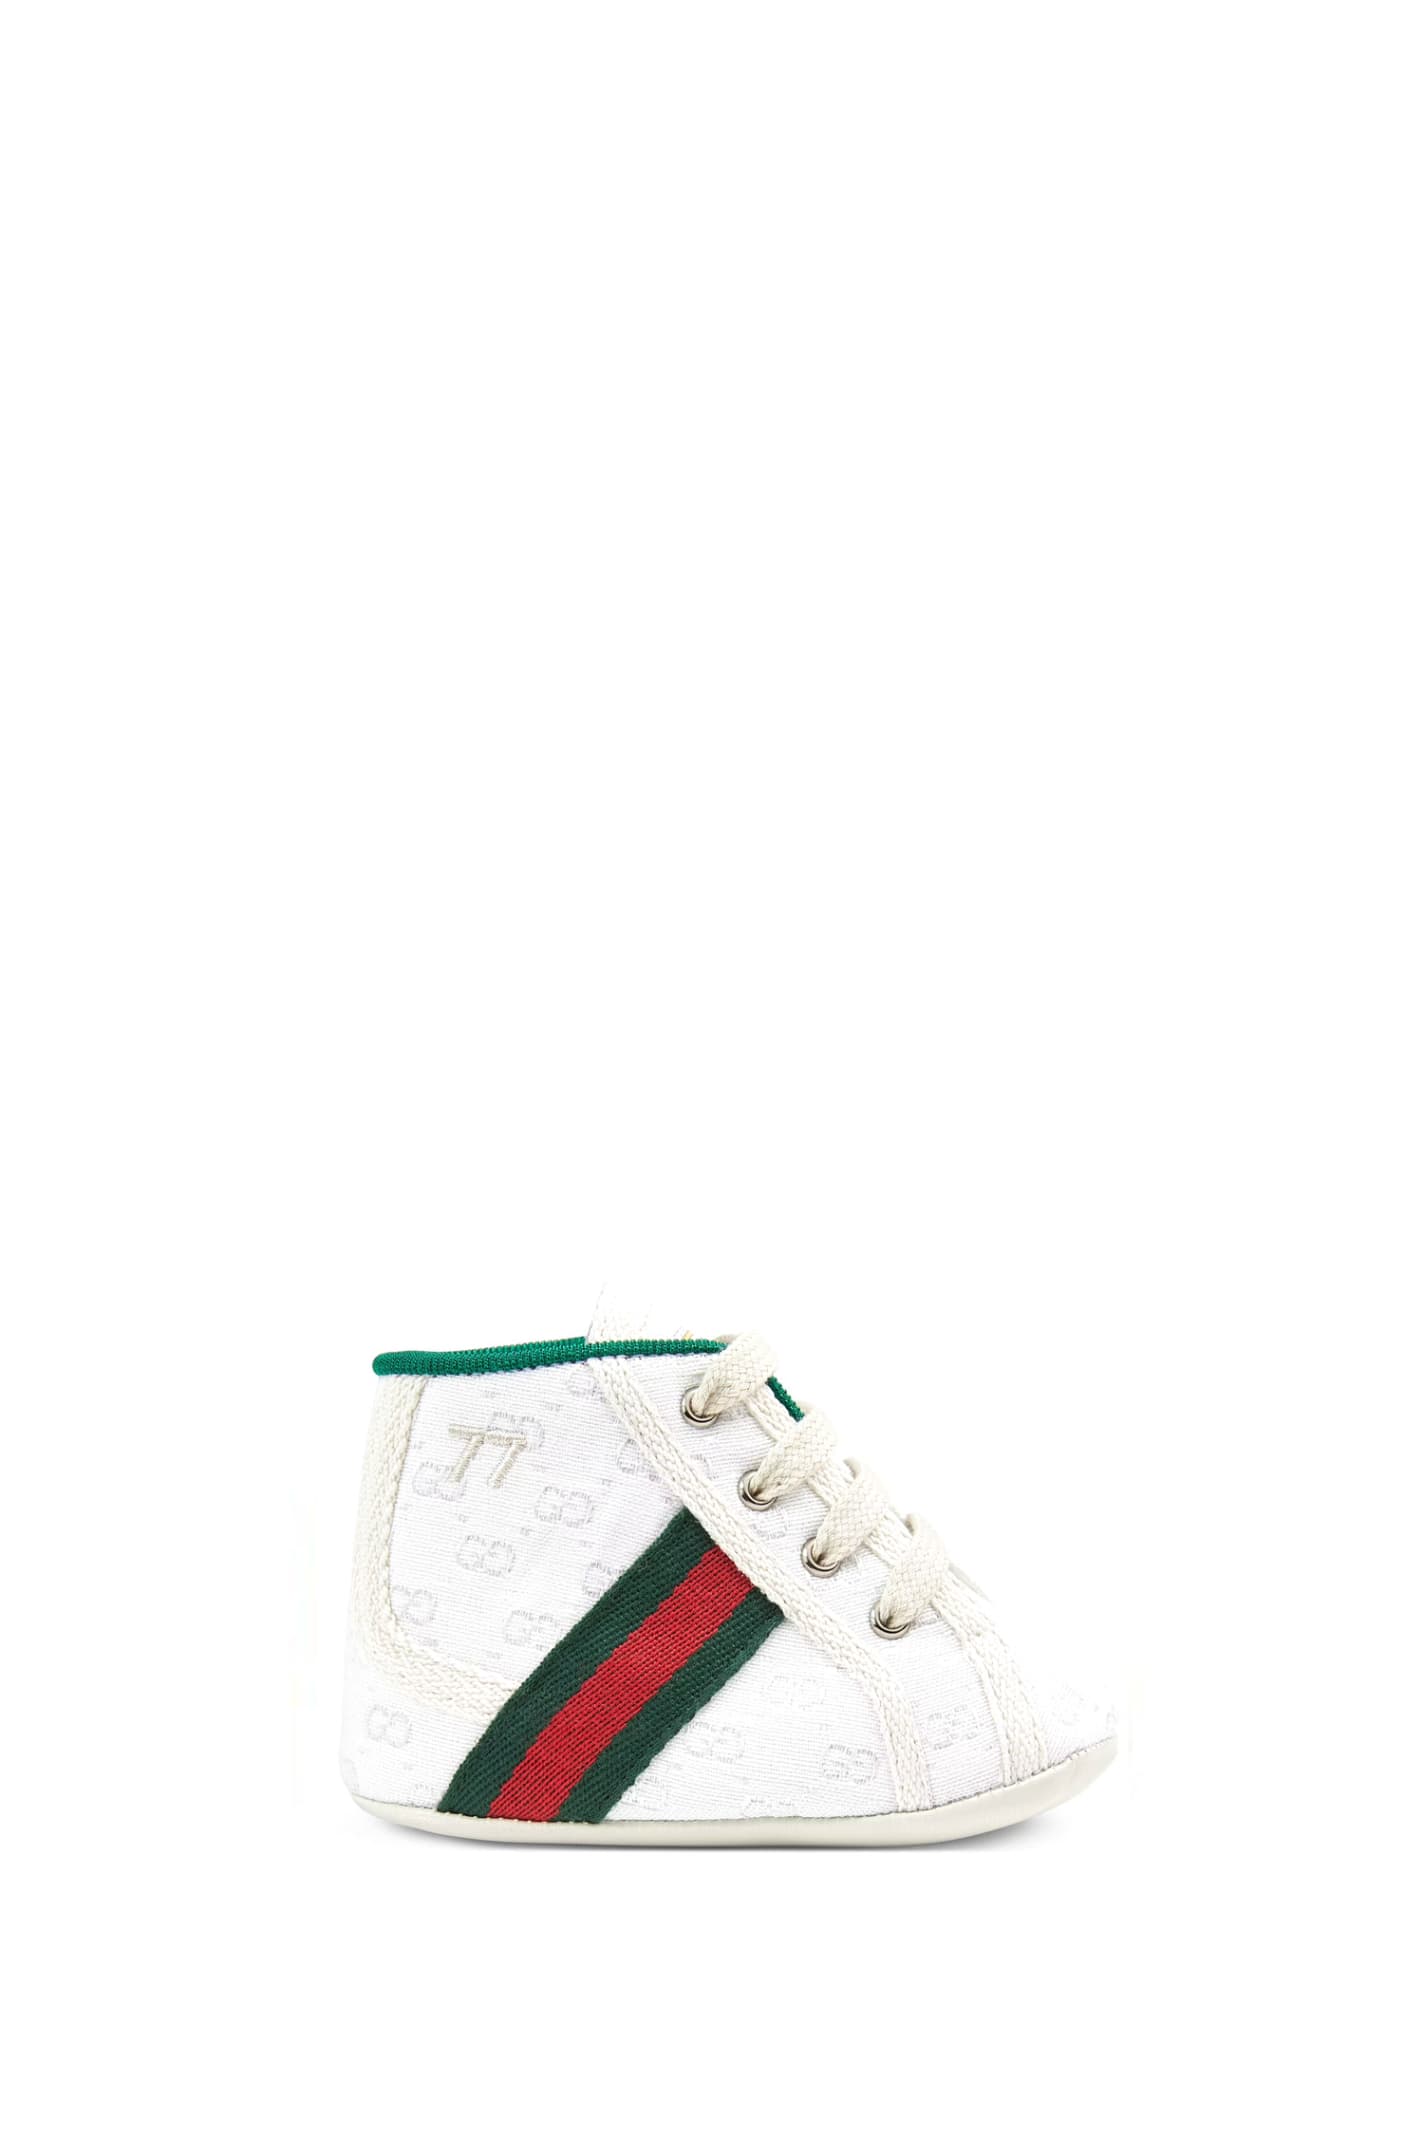 1977 Gucci Tennis Sneakers